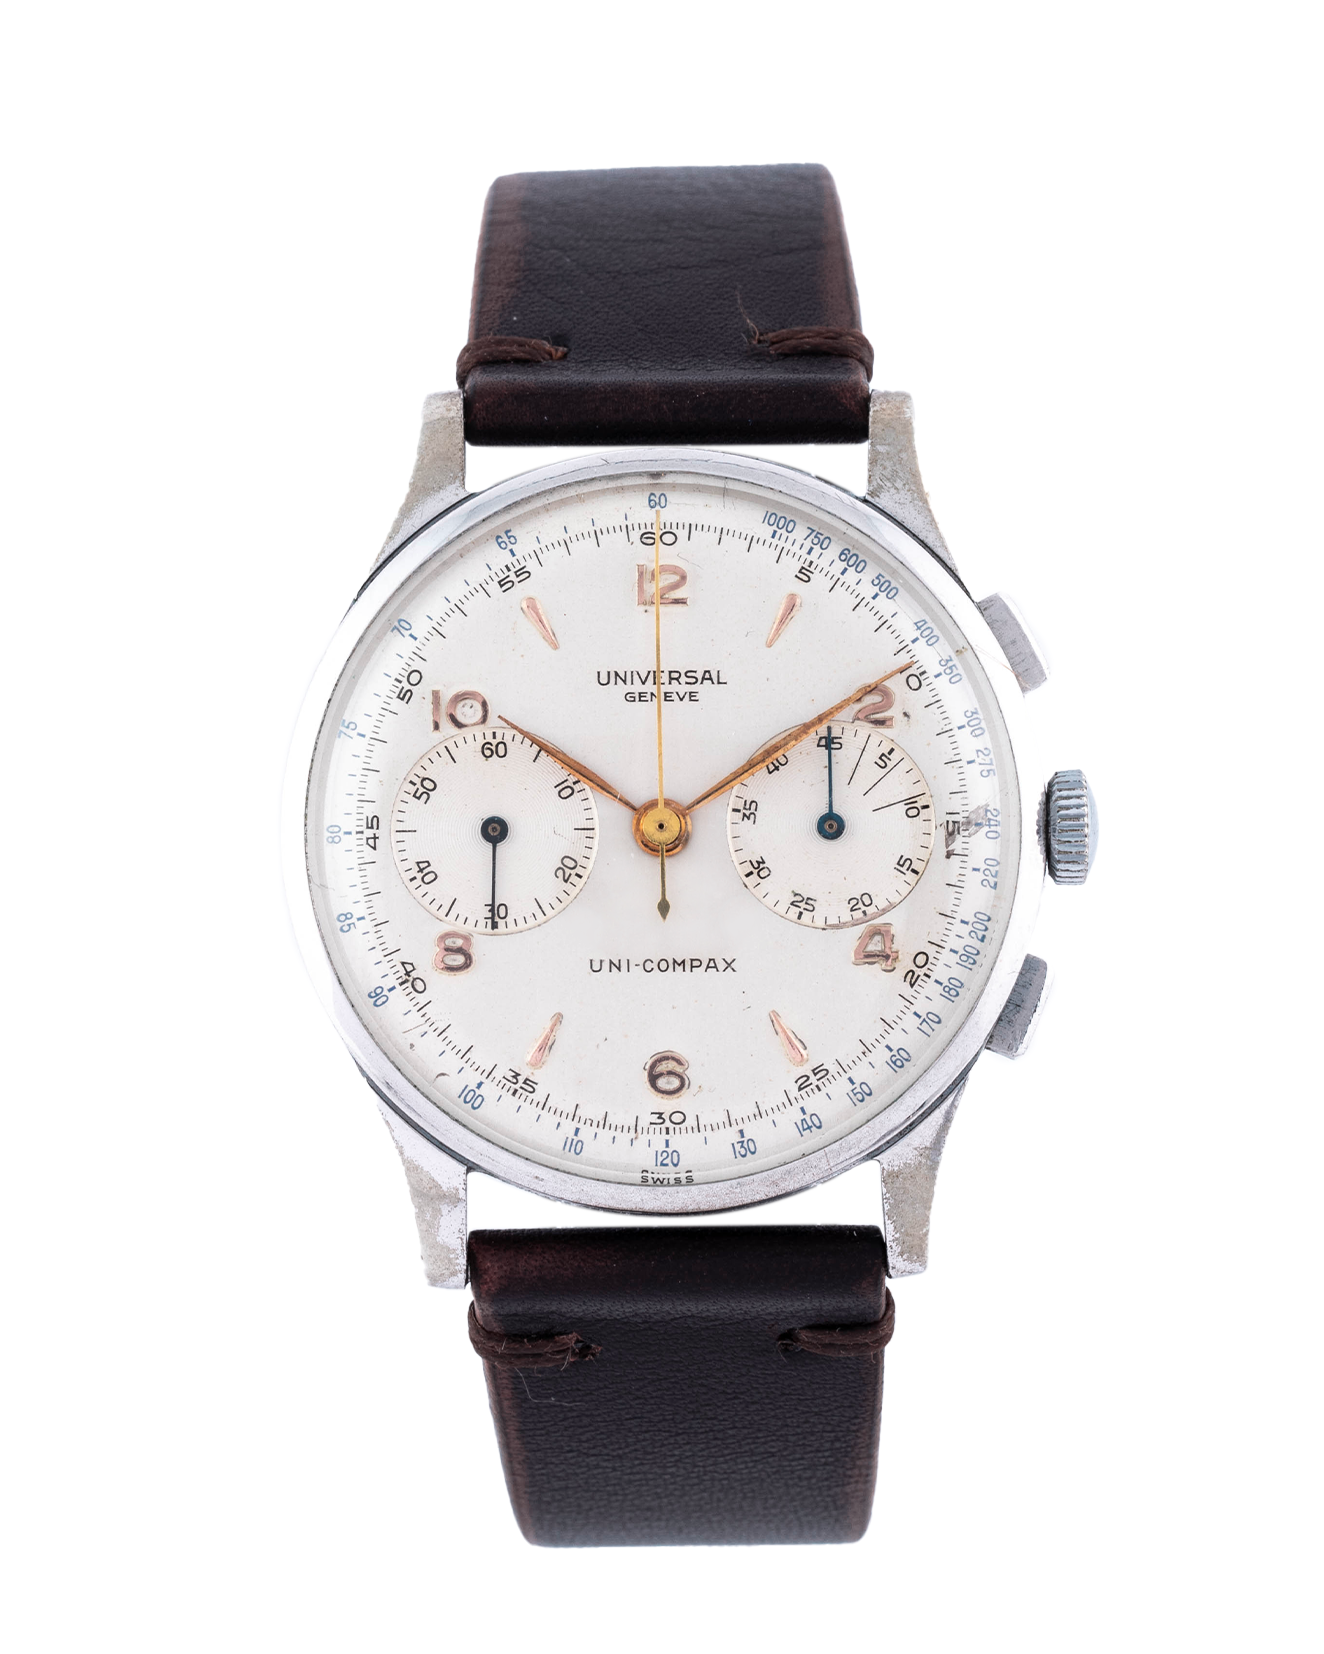 Universal Genève Ref. 32416 Uni-Compax Oversize in stainless steel with white dial and gold indexes